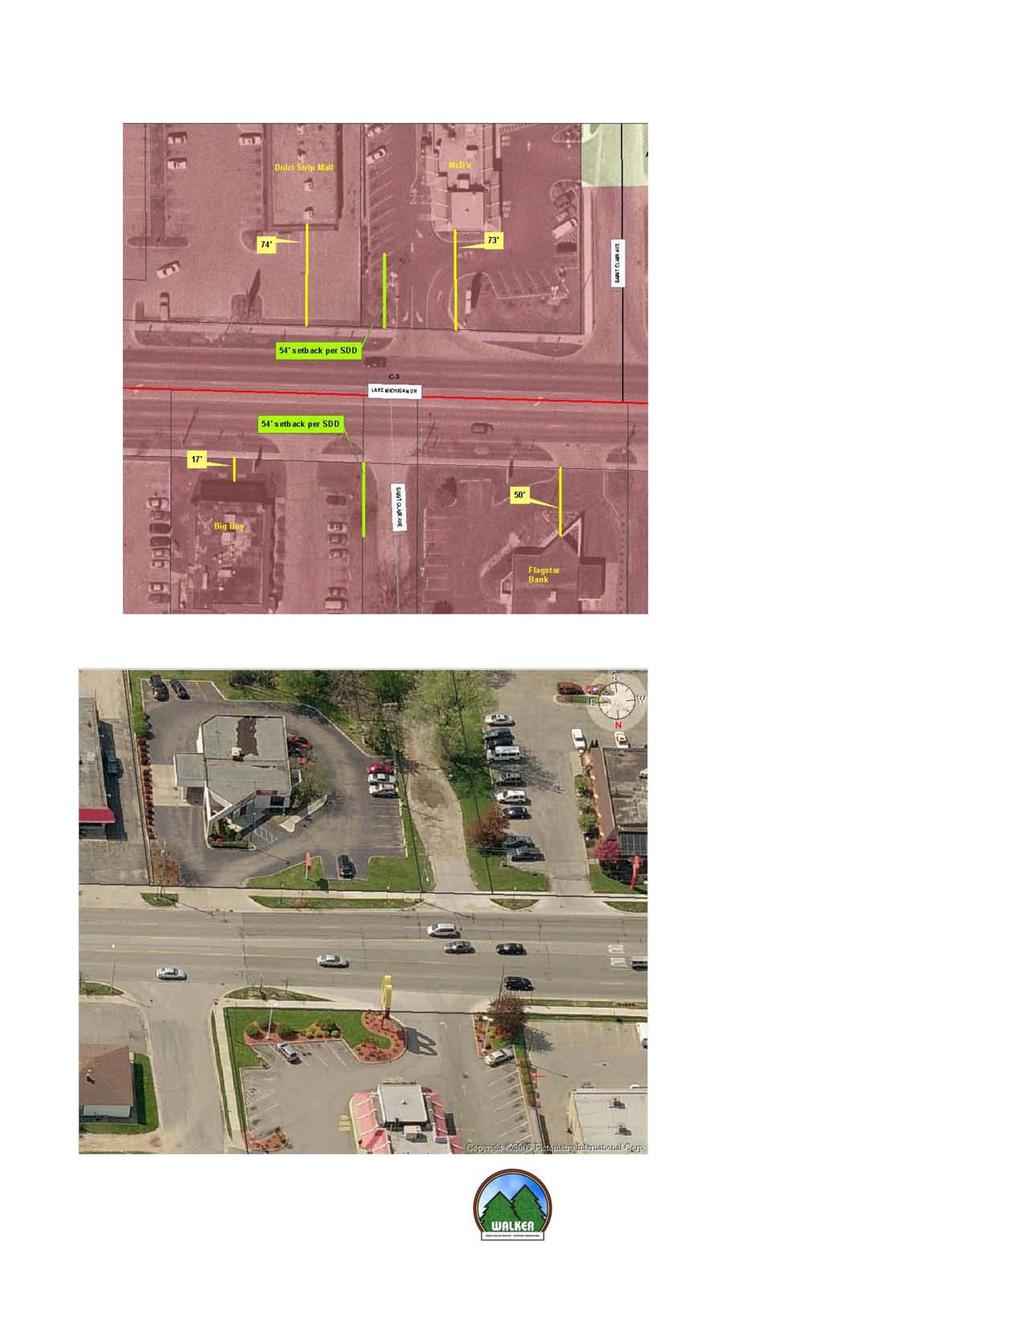 10 Map 7: Focus on McDonald s and Flagstar Bank sites. This area has developed under more recent highway commercial site planning. As such, these sites lack connectivity for pedestrians or vehicles.